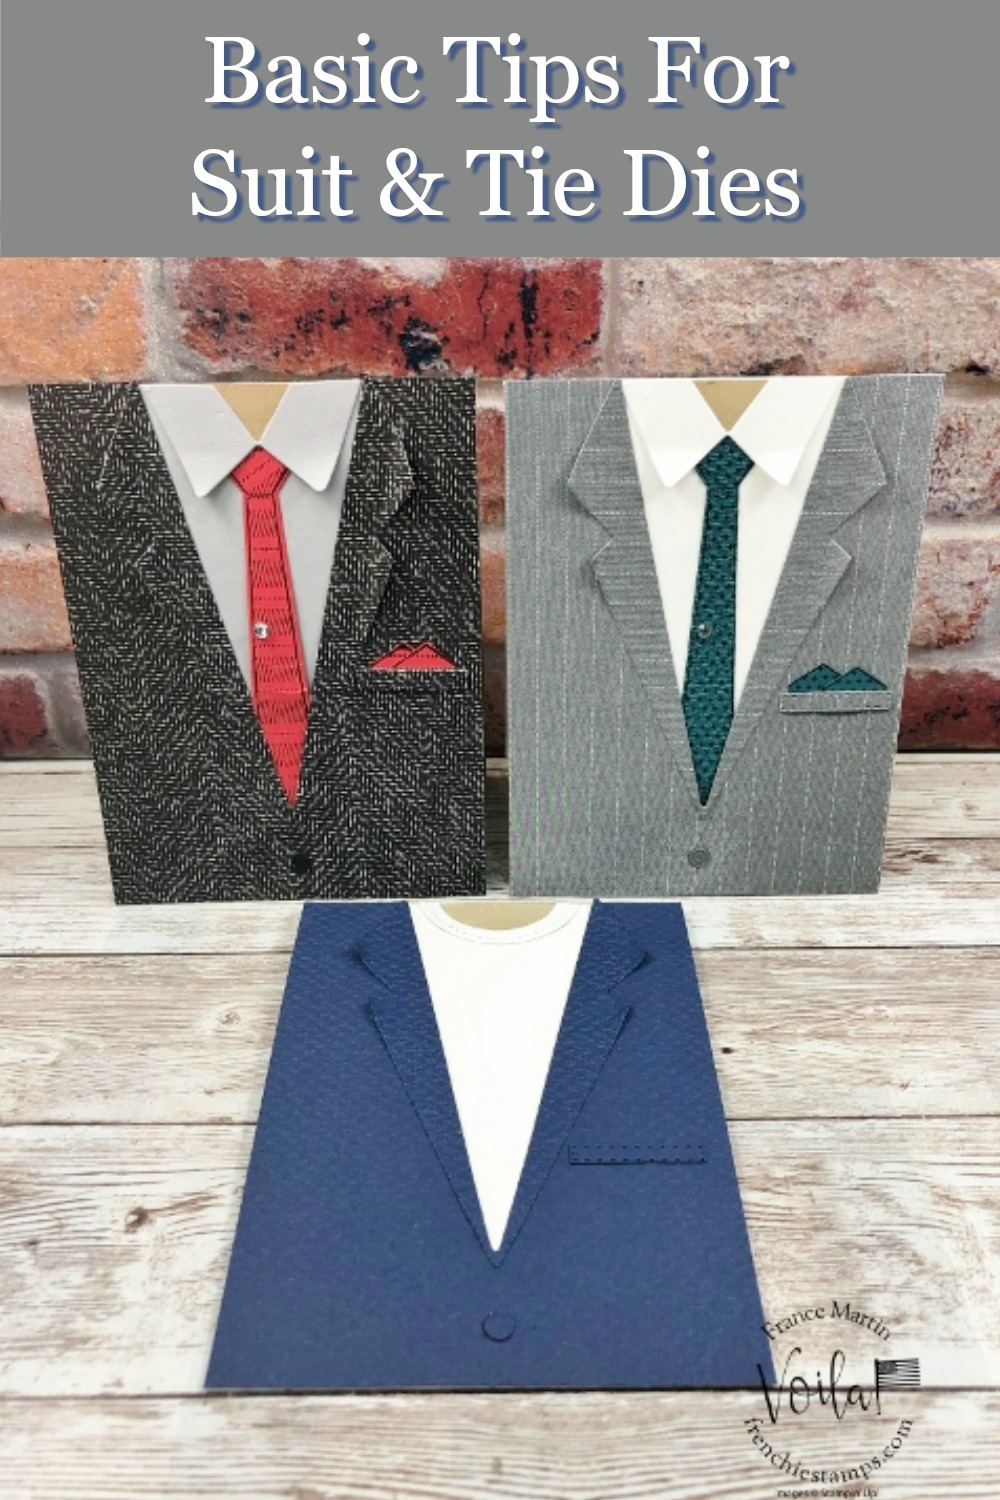 Tips with the Suit & Tie Dies Simple Masculine Cards